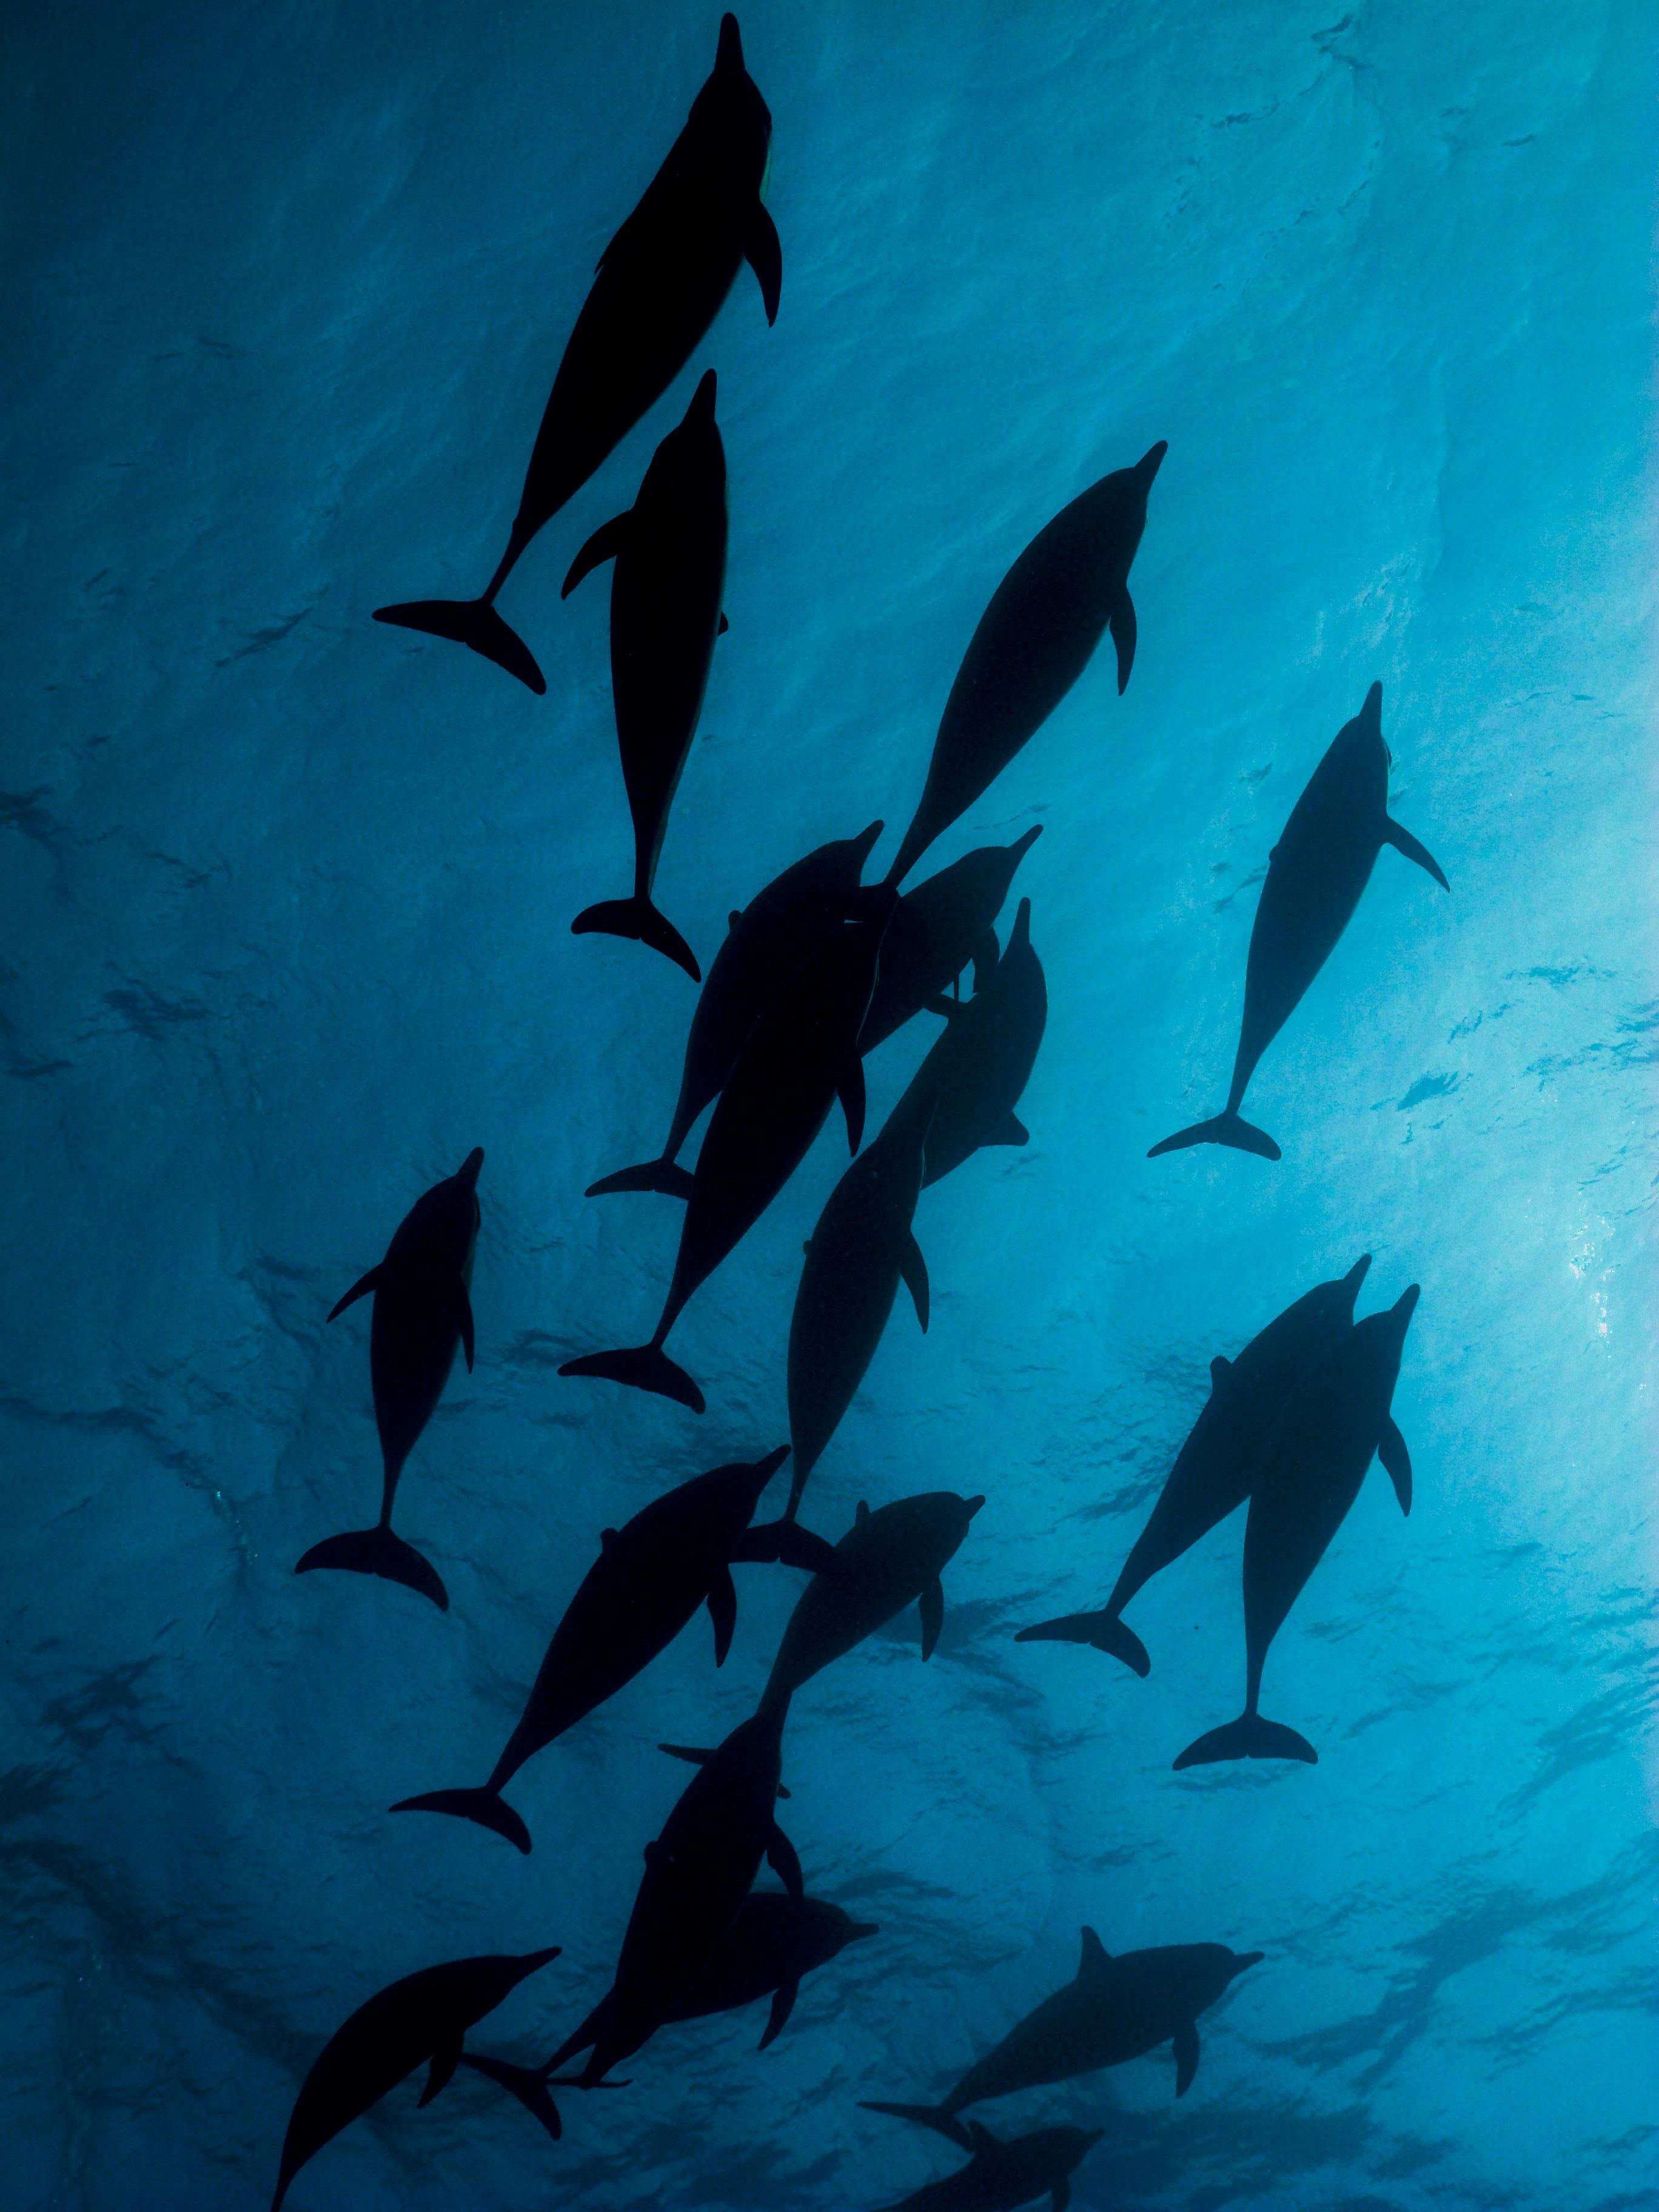 Dolphins from the perspective of a snorkeller